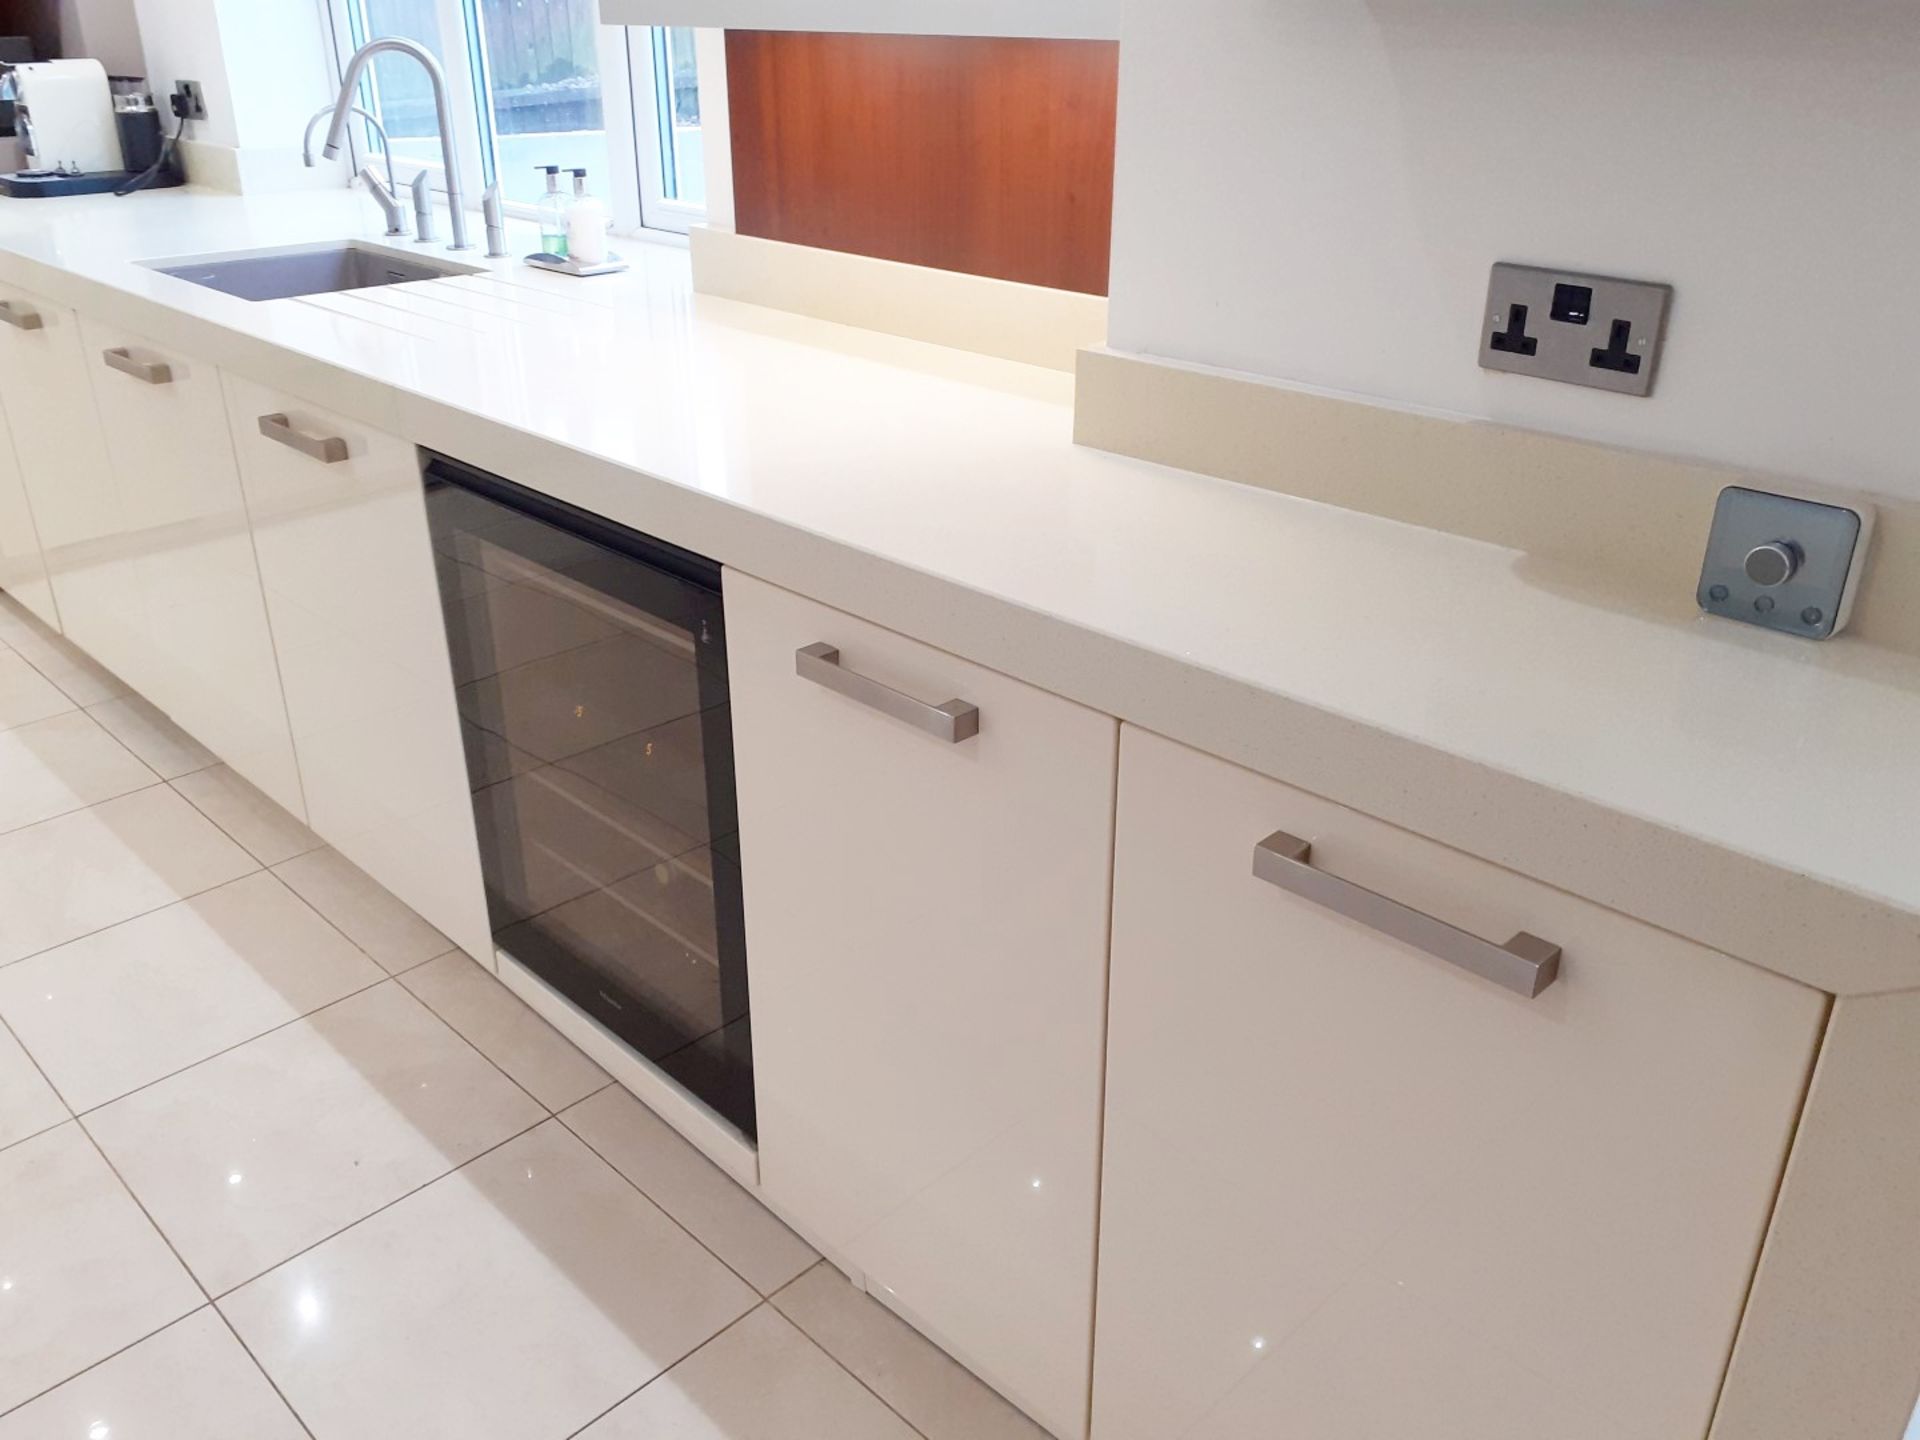 1 x ALNO Fitted Kitchen With Integrated Miele Appliances, Silestone Worktops & Breakfast Island - Image 77 of 86